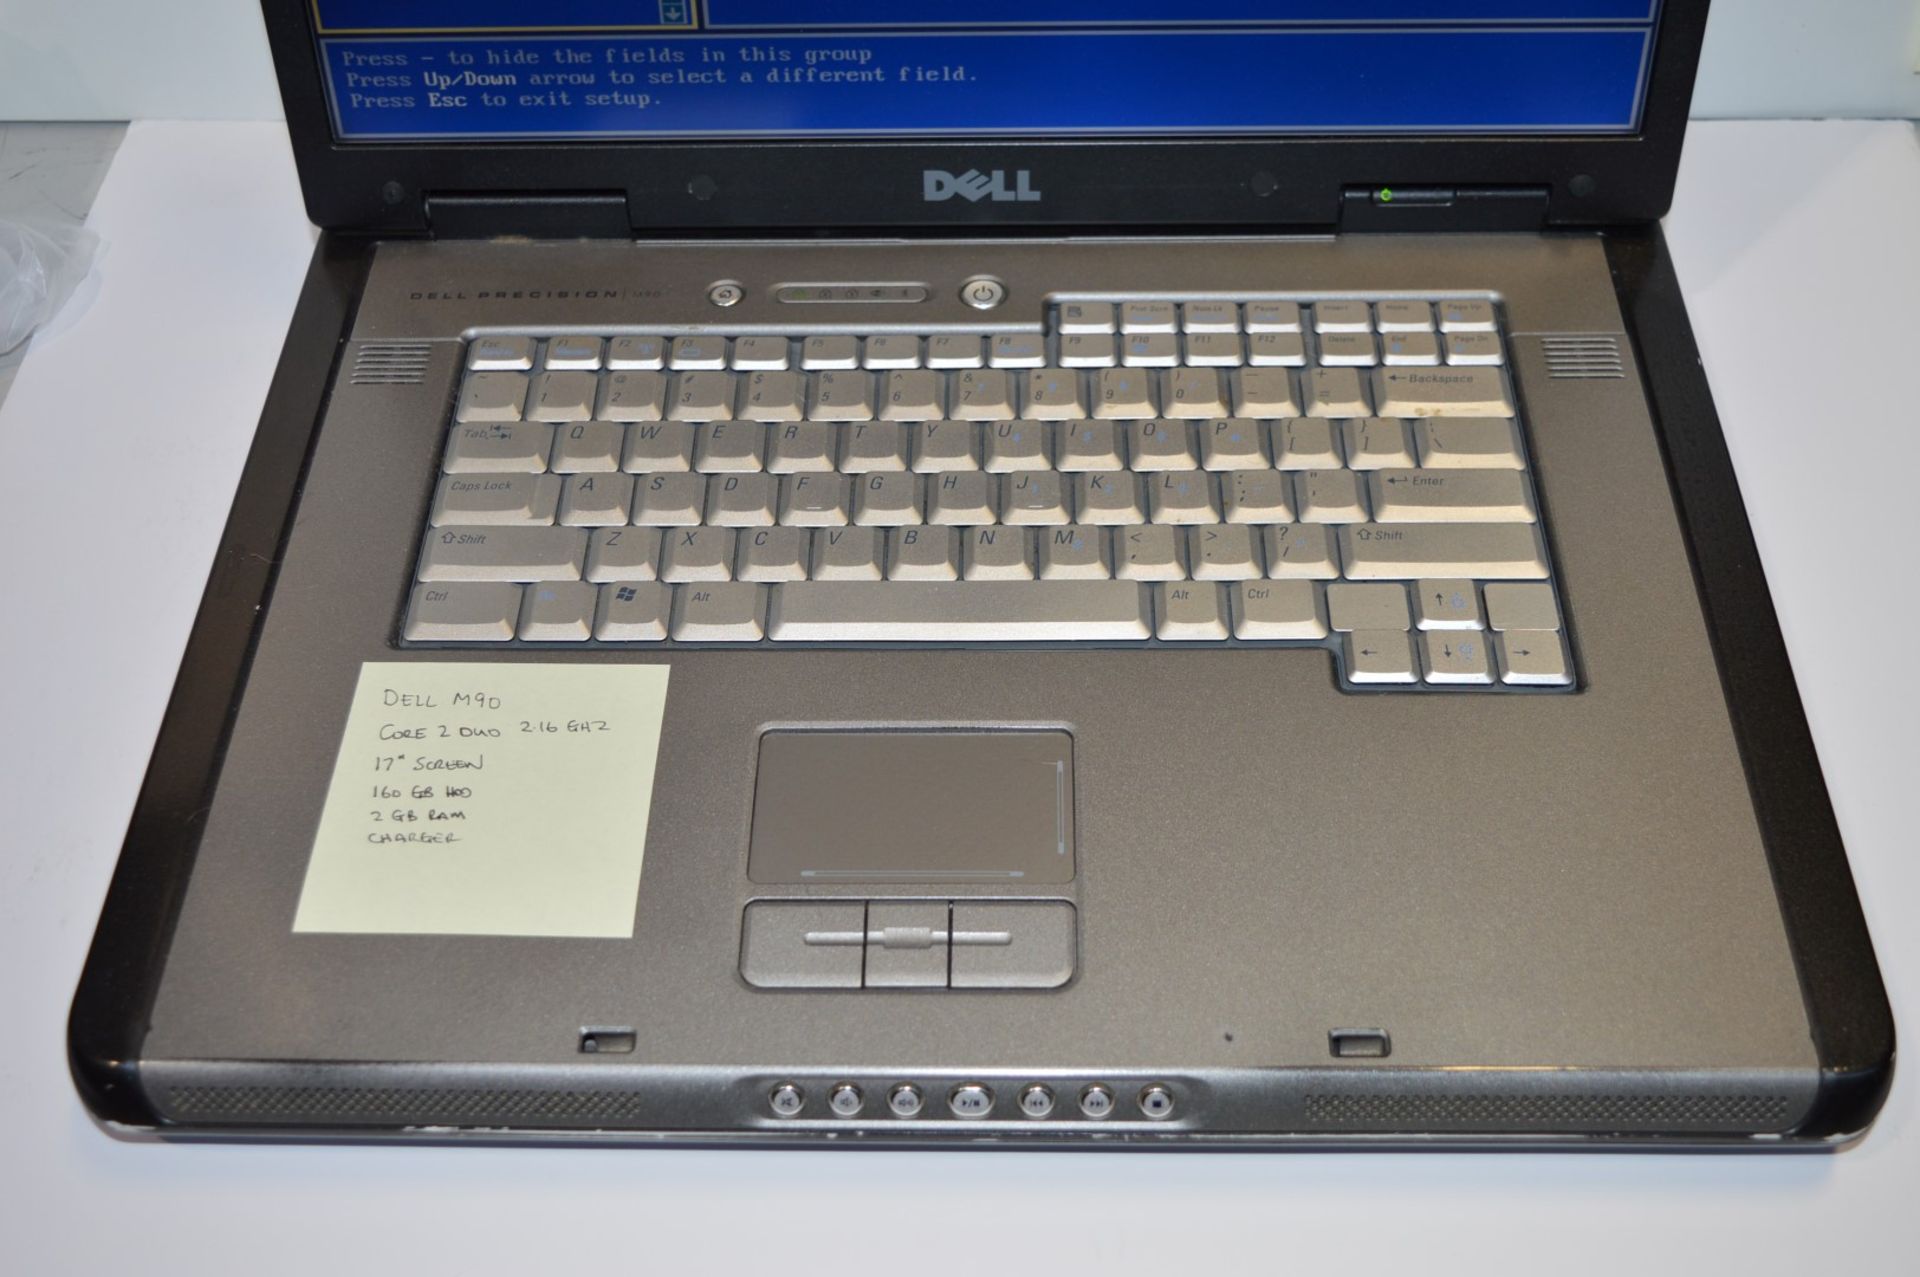 1 x Dell M90 17 Inch Laptop Computer - Features an Intel Core 2 Duo 2.16ghz Processor, 160gb Hard - Image 4 of 12